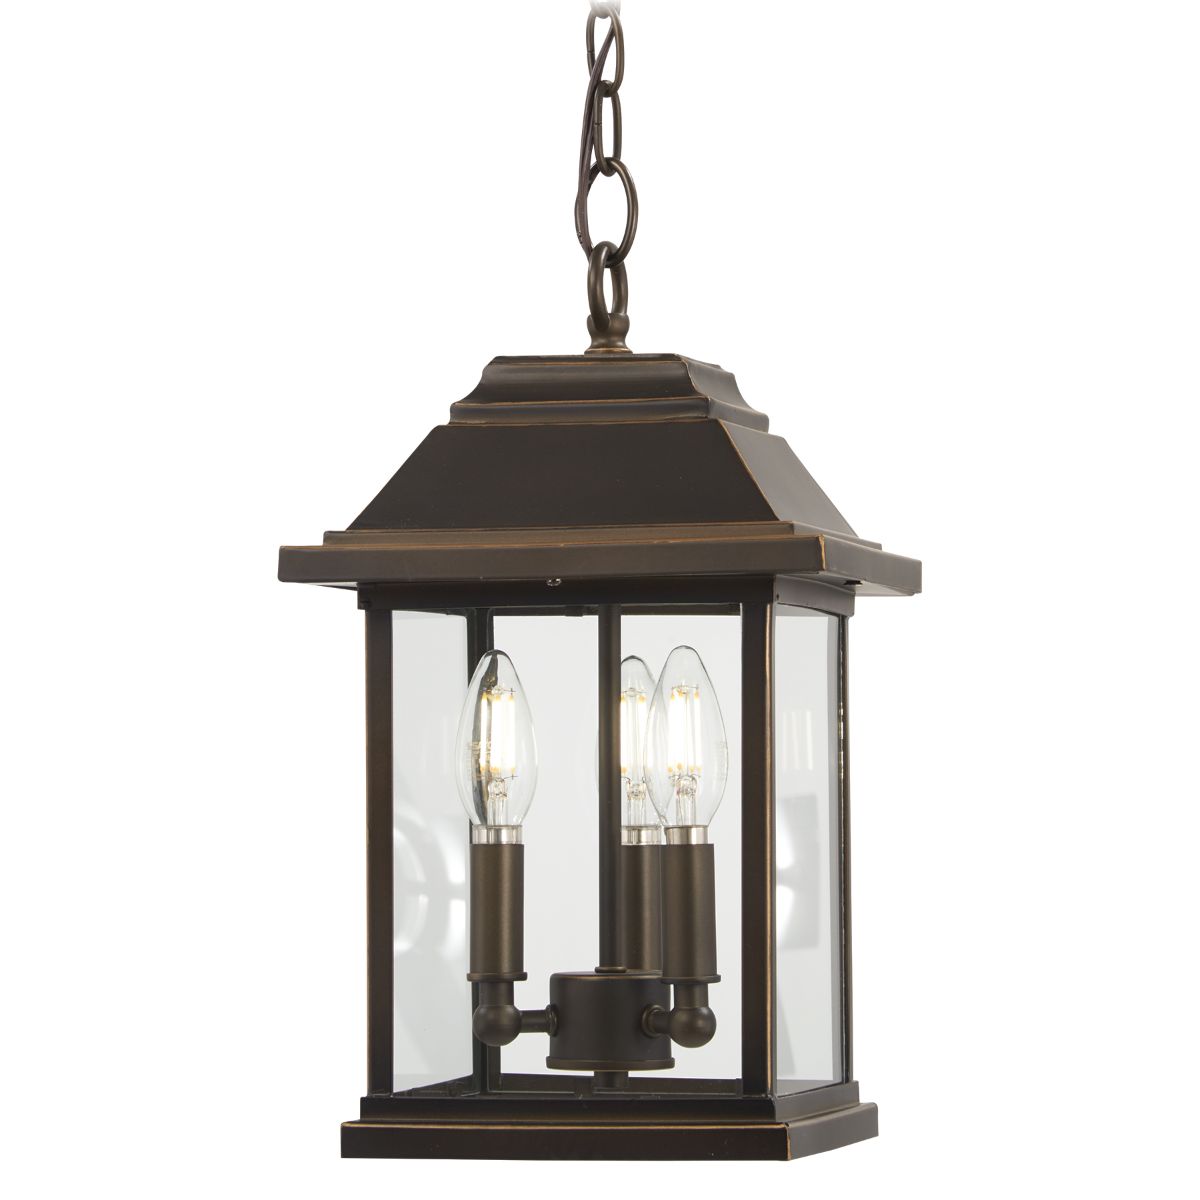 Mariner's Pointe 3 lights 9 in. Outdoor Hanging Lantern Oil Rubbed Bronze & Gold finish